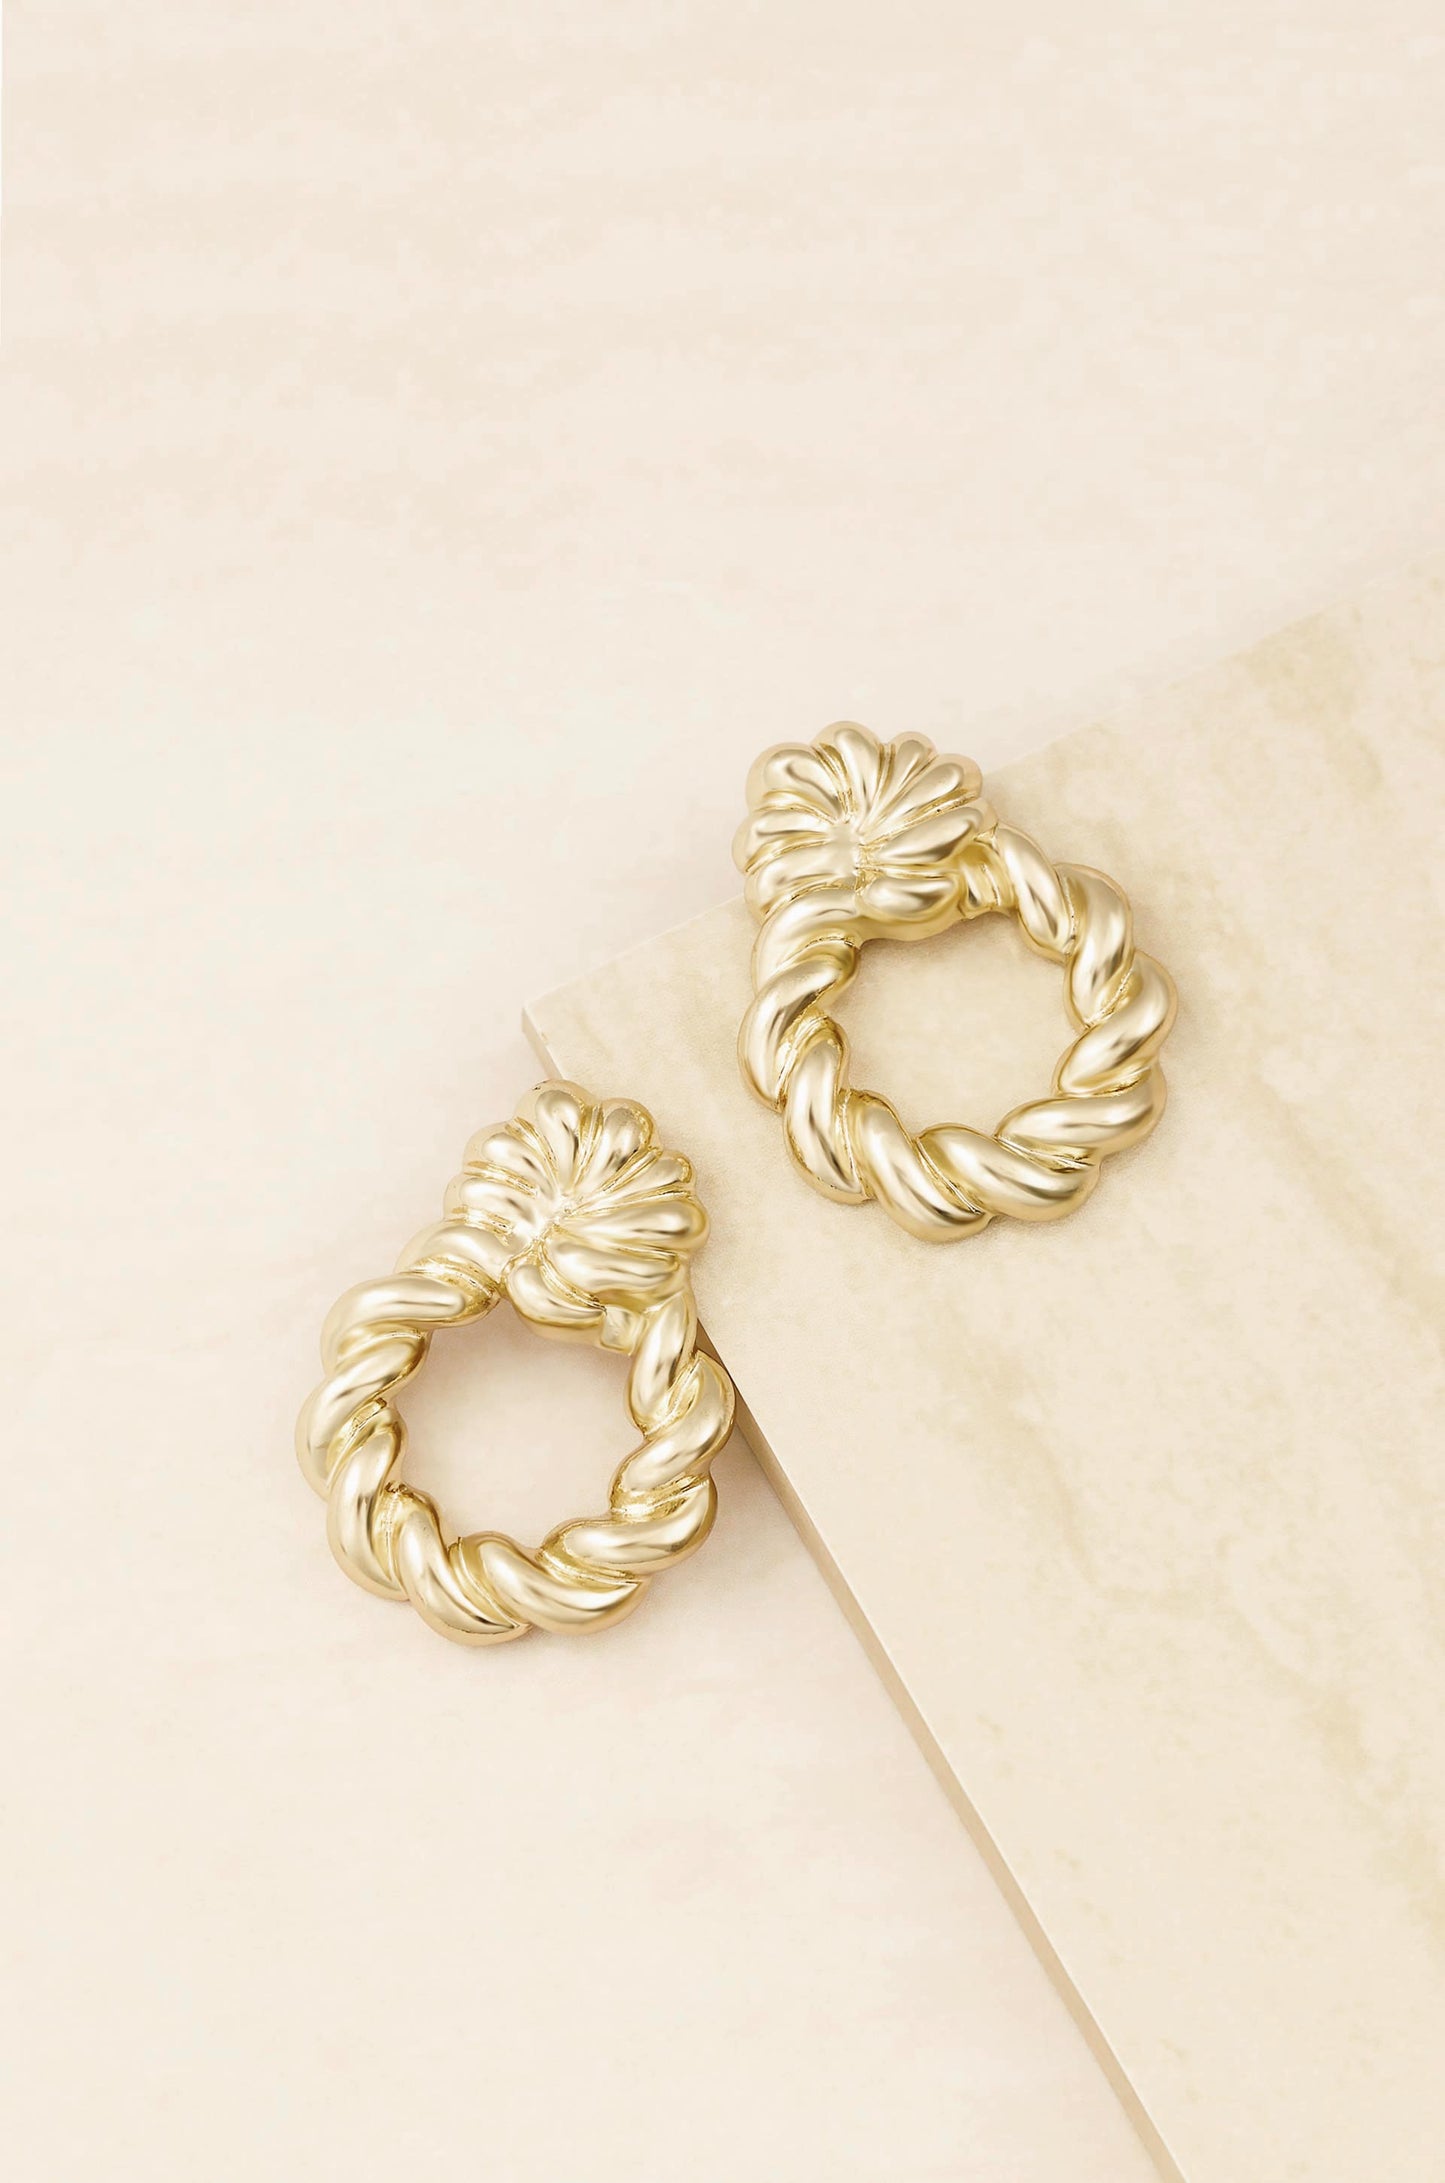 Twist and Shout 18k Gold Plated Textured Earrings on slate background